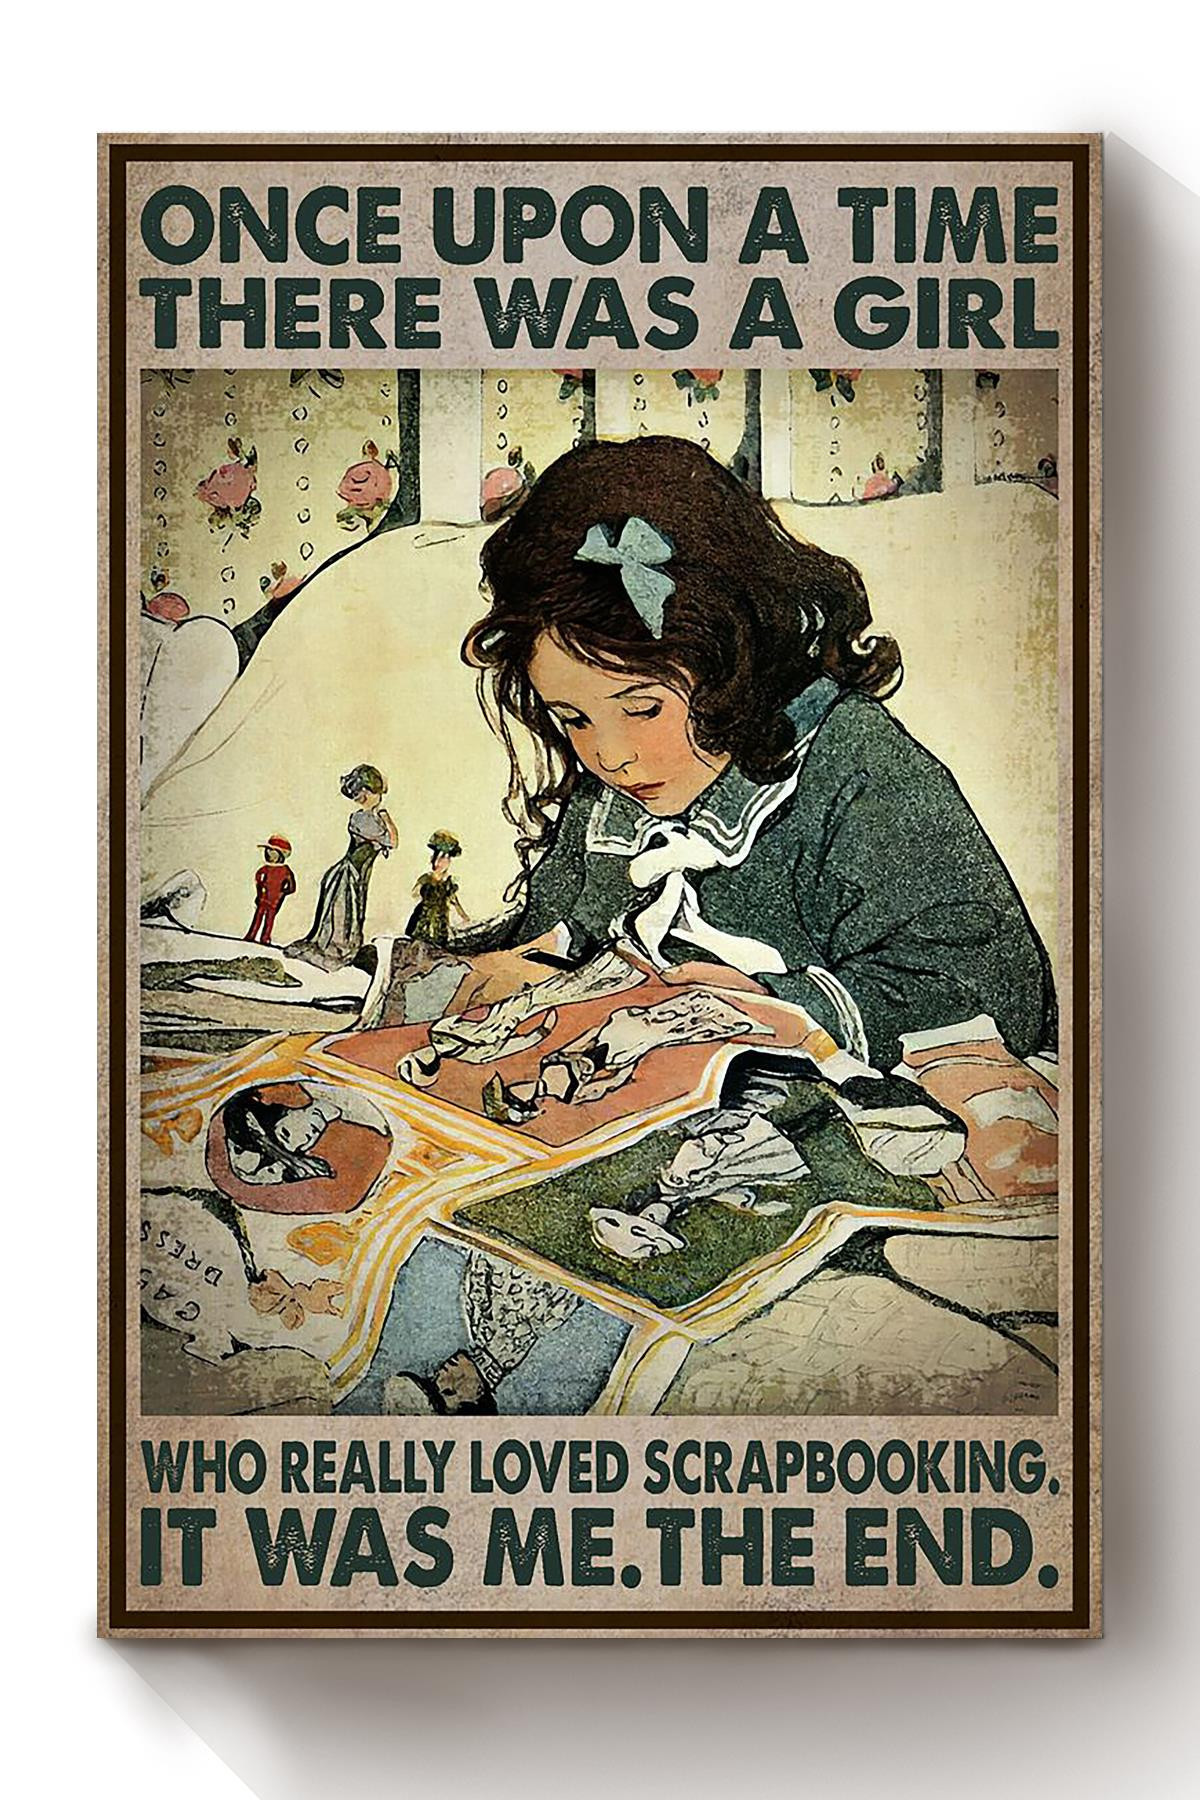 Once Upon A Time Girl Loved Scrapbooking Gift For Scrapbooking Lover Scrapbooker Craft Scrapper Canvas Wrapped Canvas 8x10